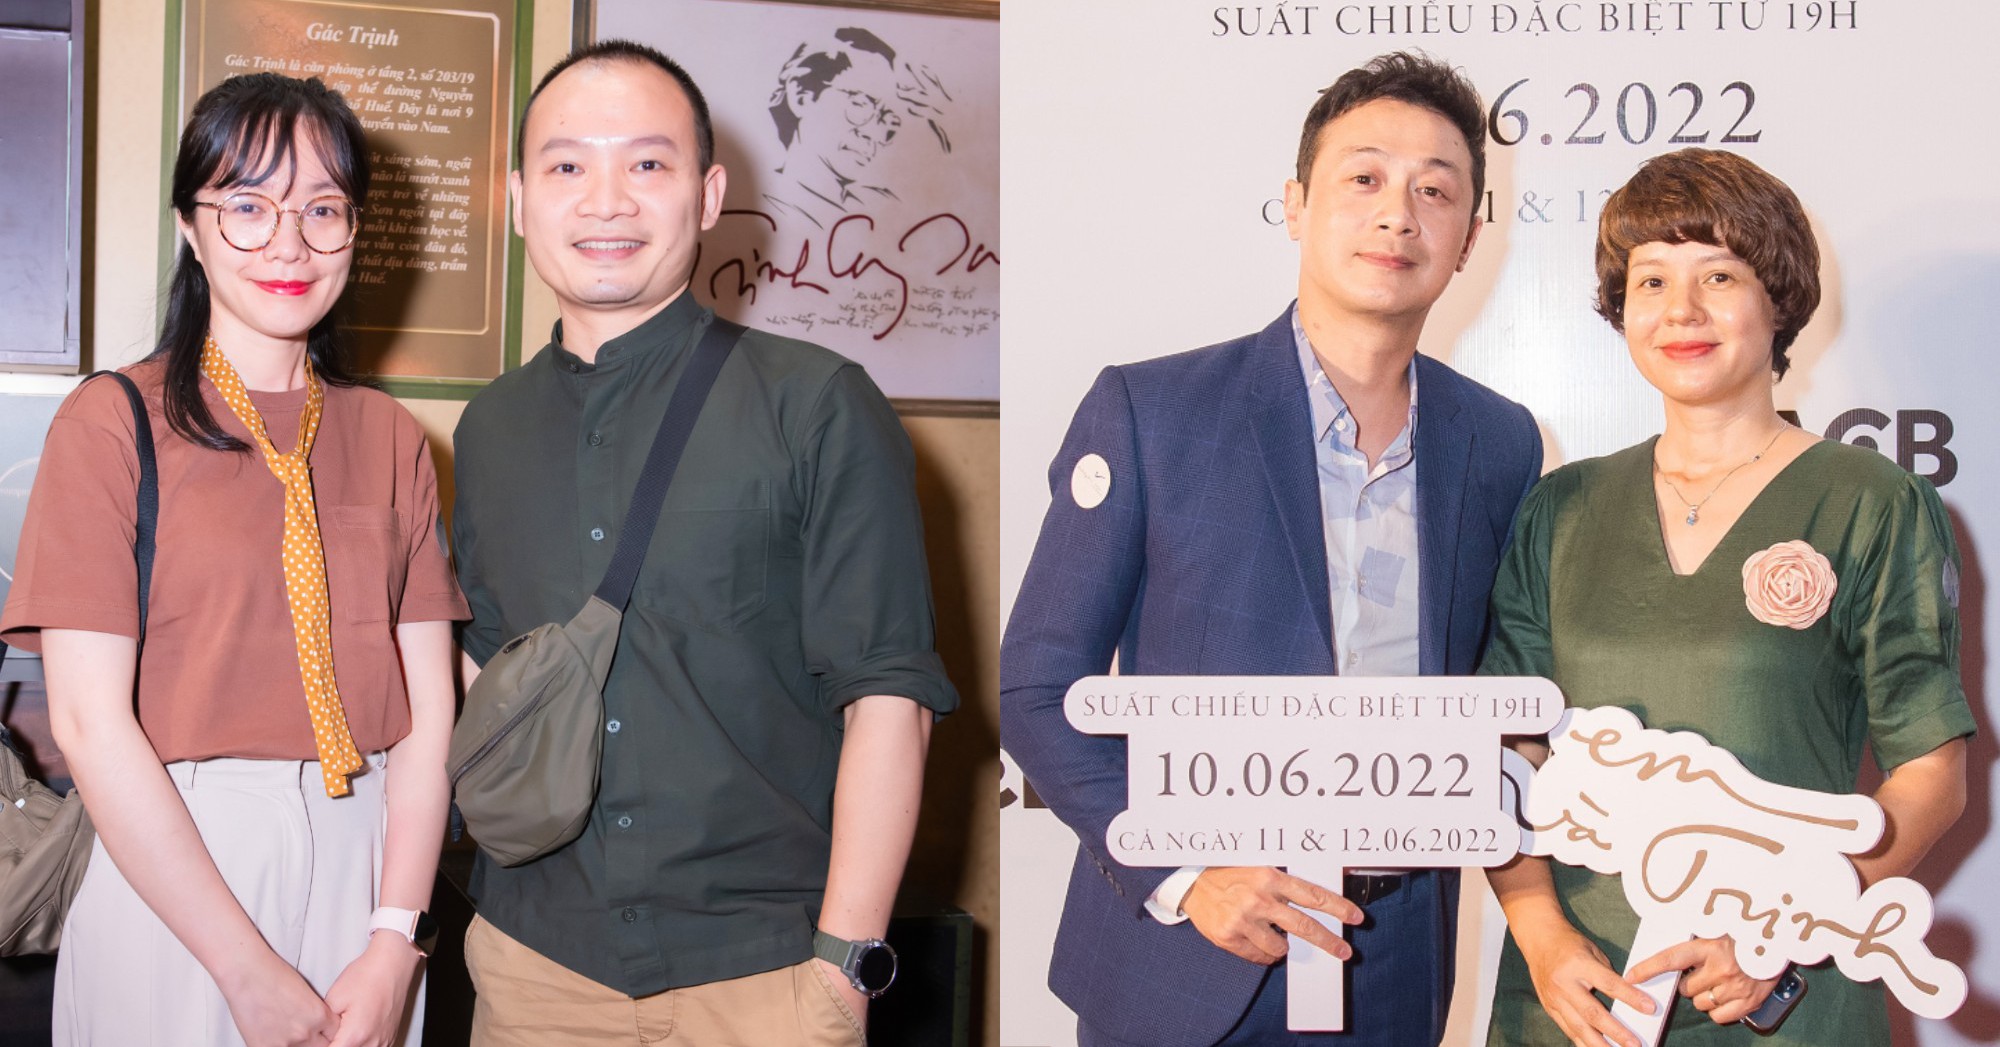 Director Lai Bac Hai Dang and his wife rarely reunited with Diem Quynh and Anh Tuan